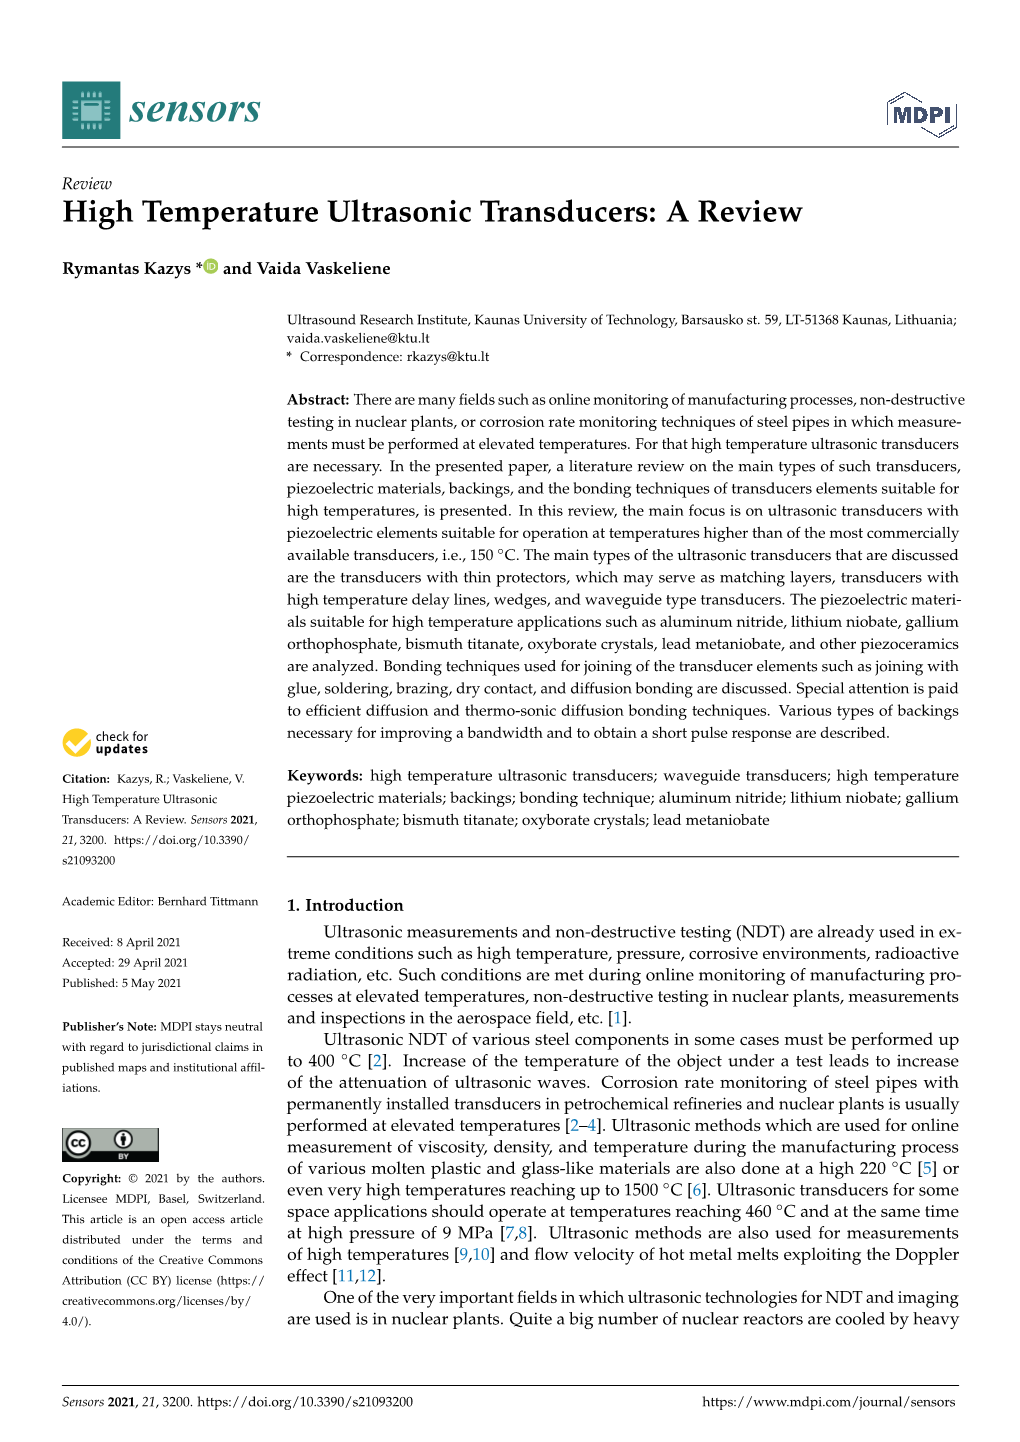 High Temperature Ultrasonic Transducers: a Review